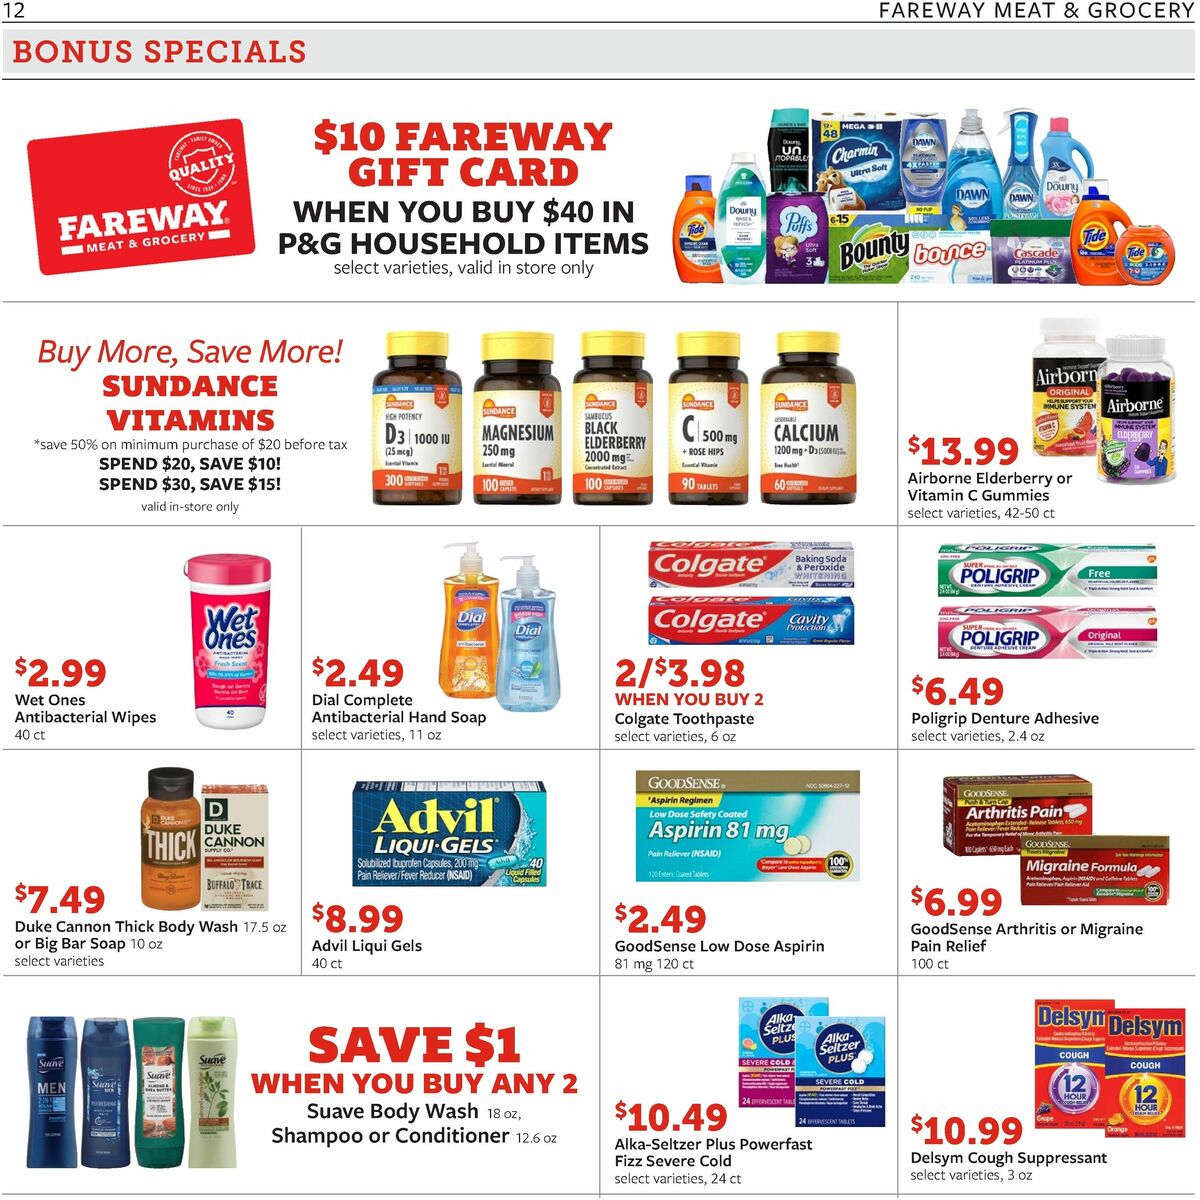 Fareway Weekly Ad from January 2